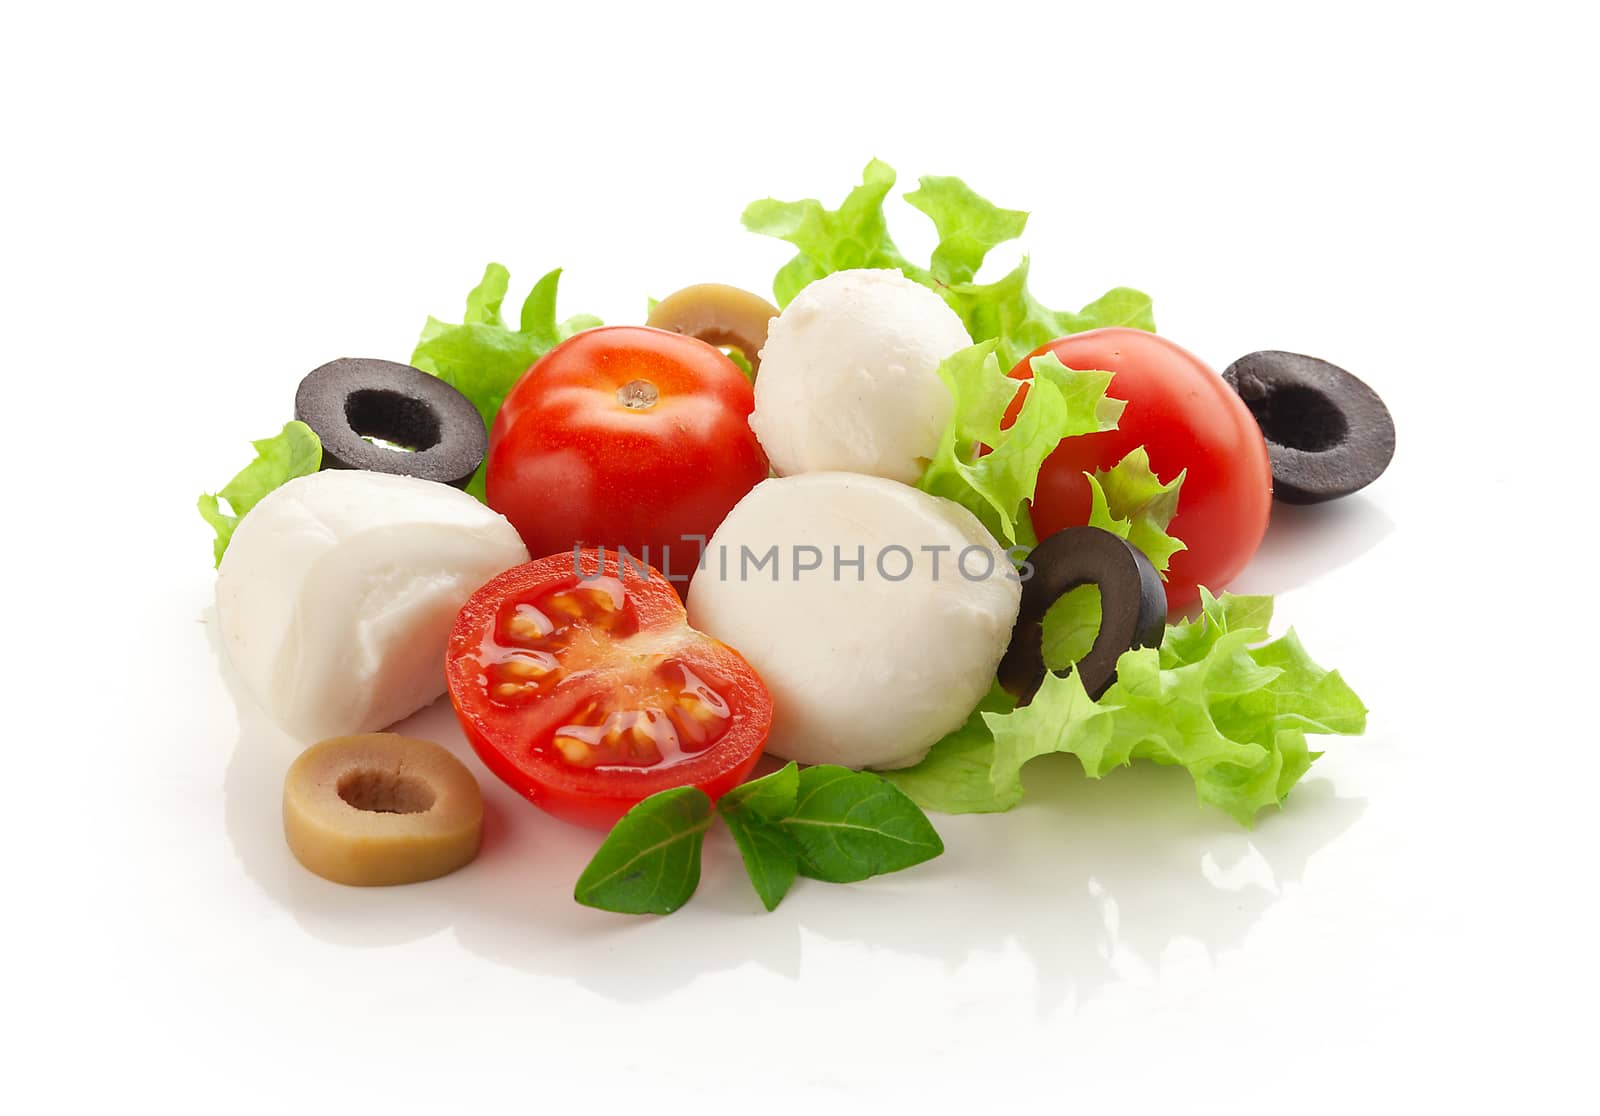 Mozzarella with tomato, olives and lettuce by Angorius